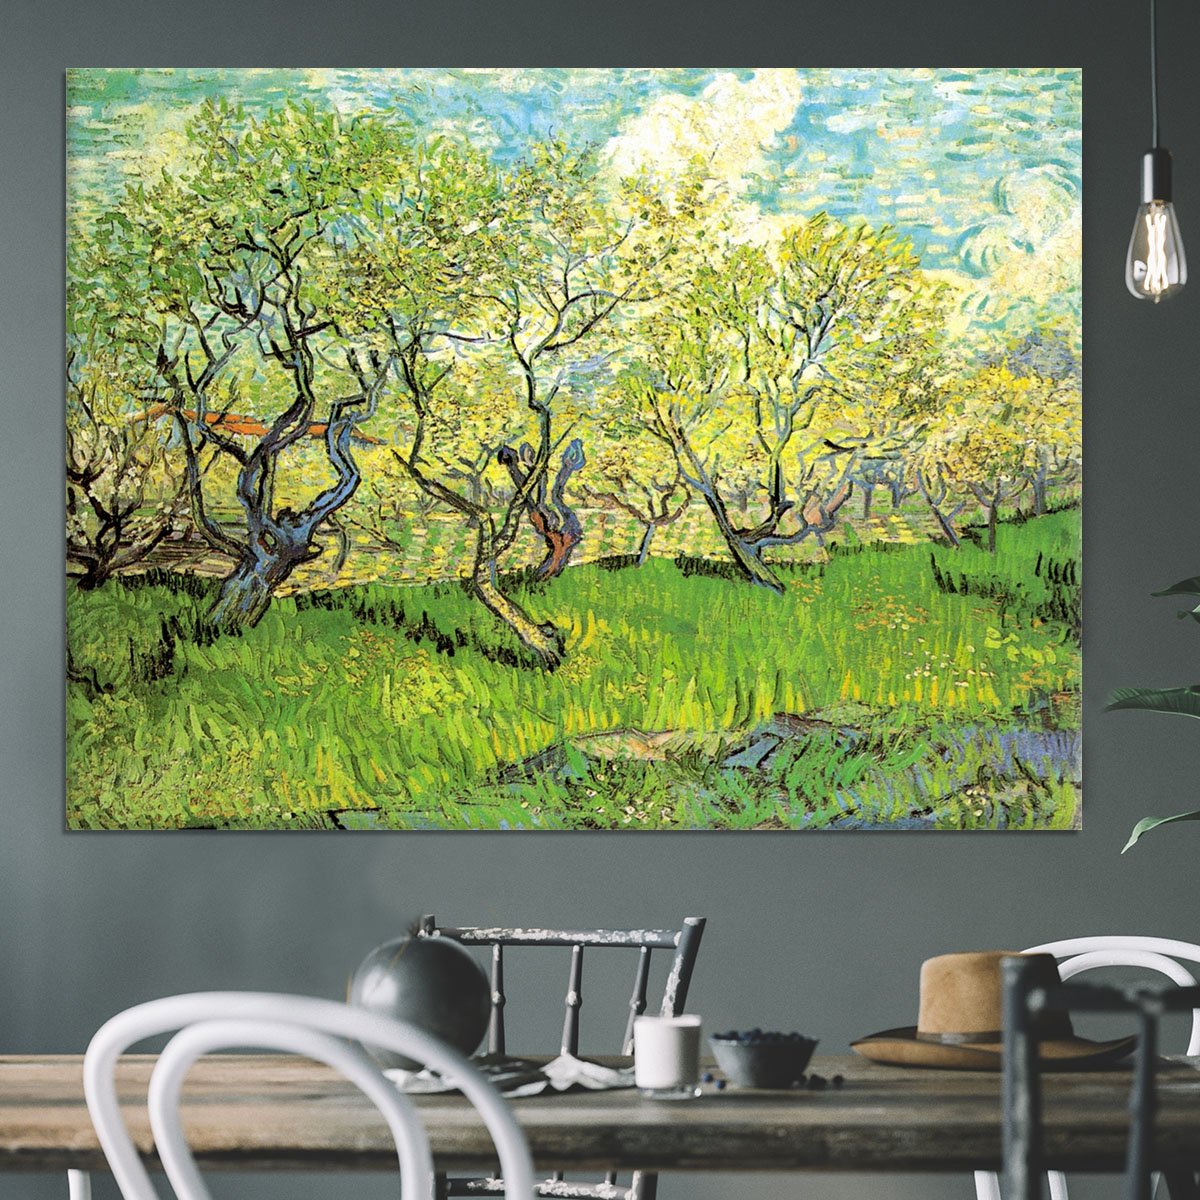 Orchard in Blossom 2 by Van Gogh Canvas Print or Poster